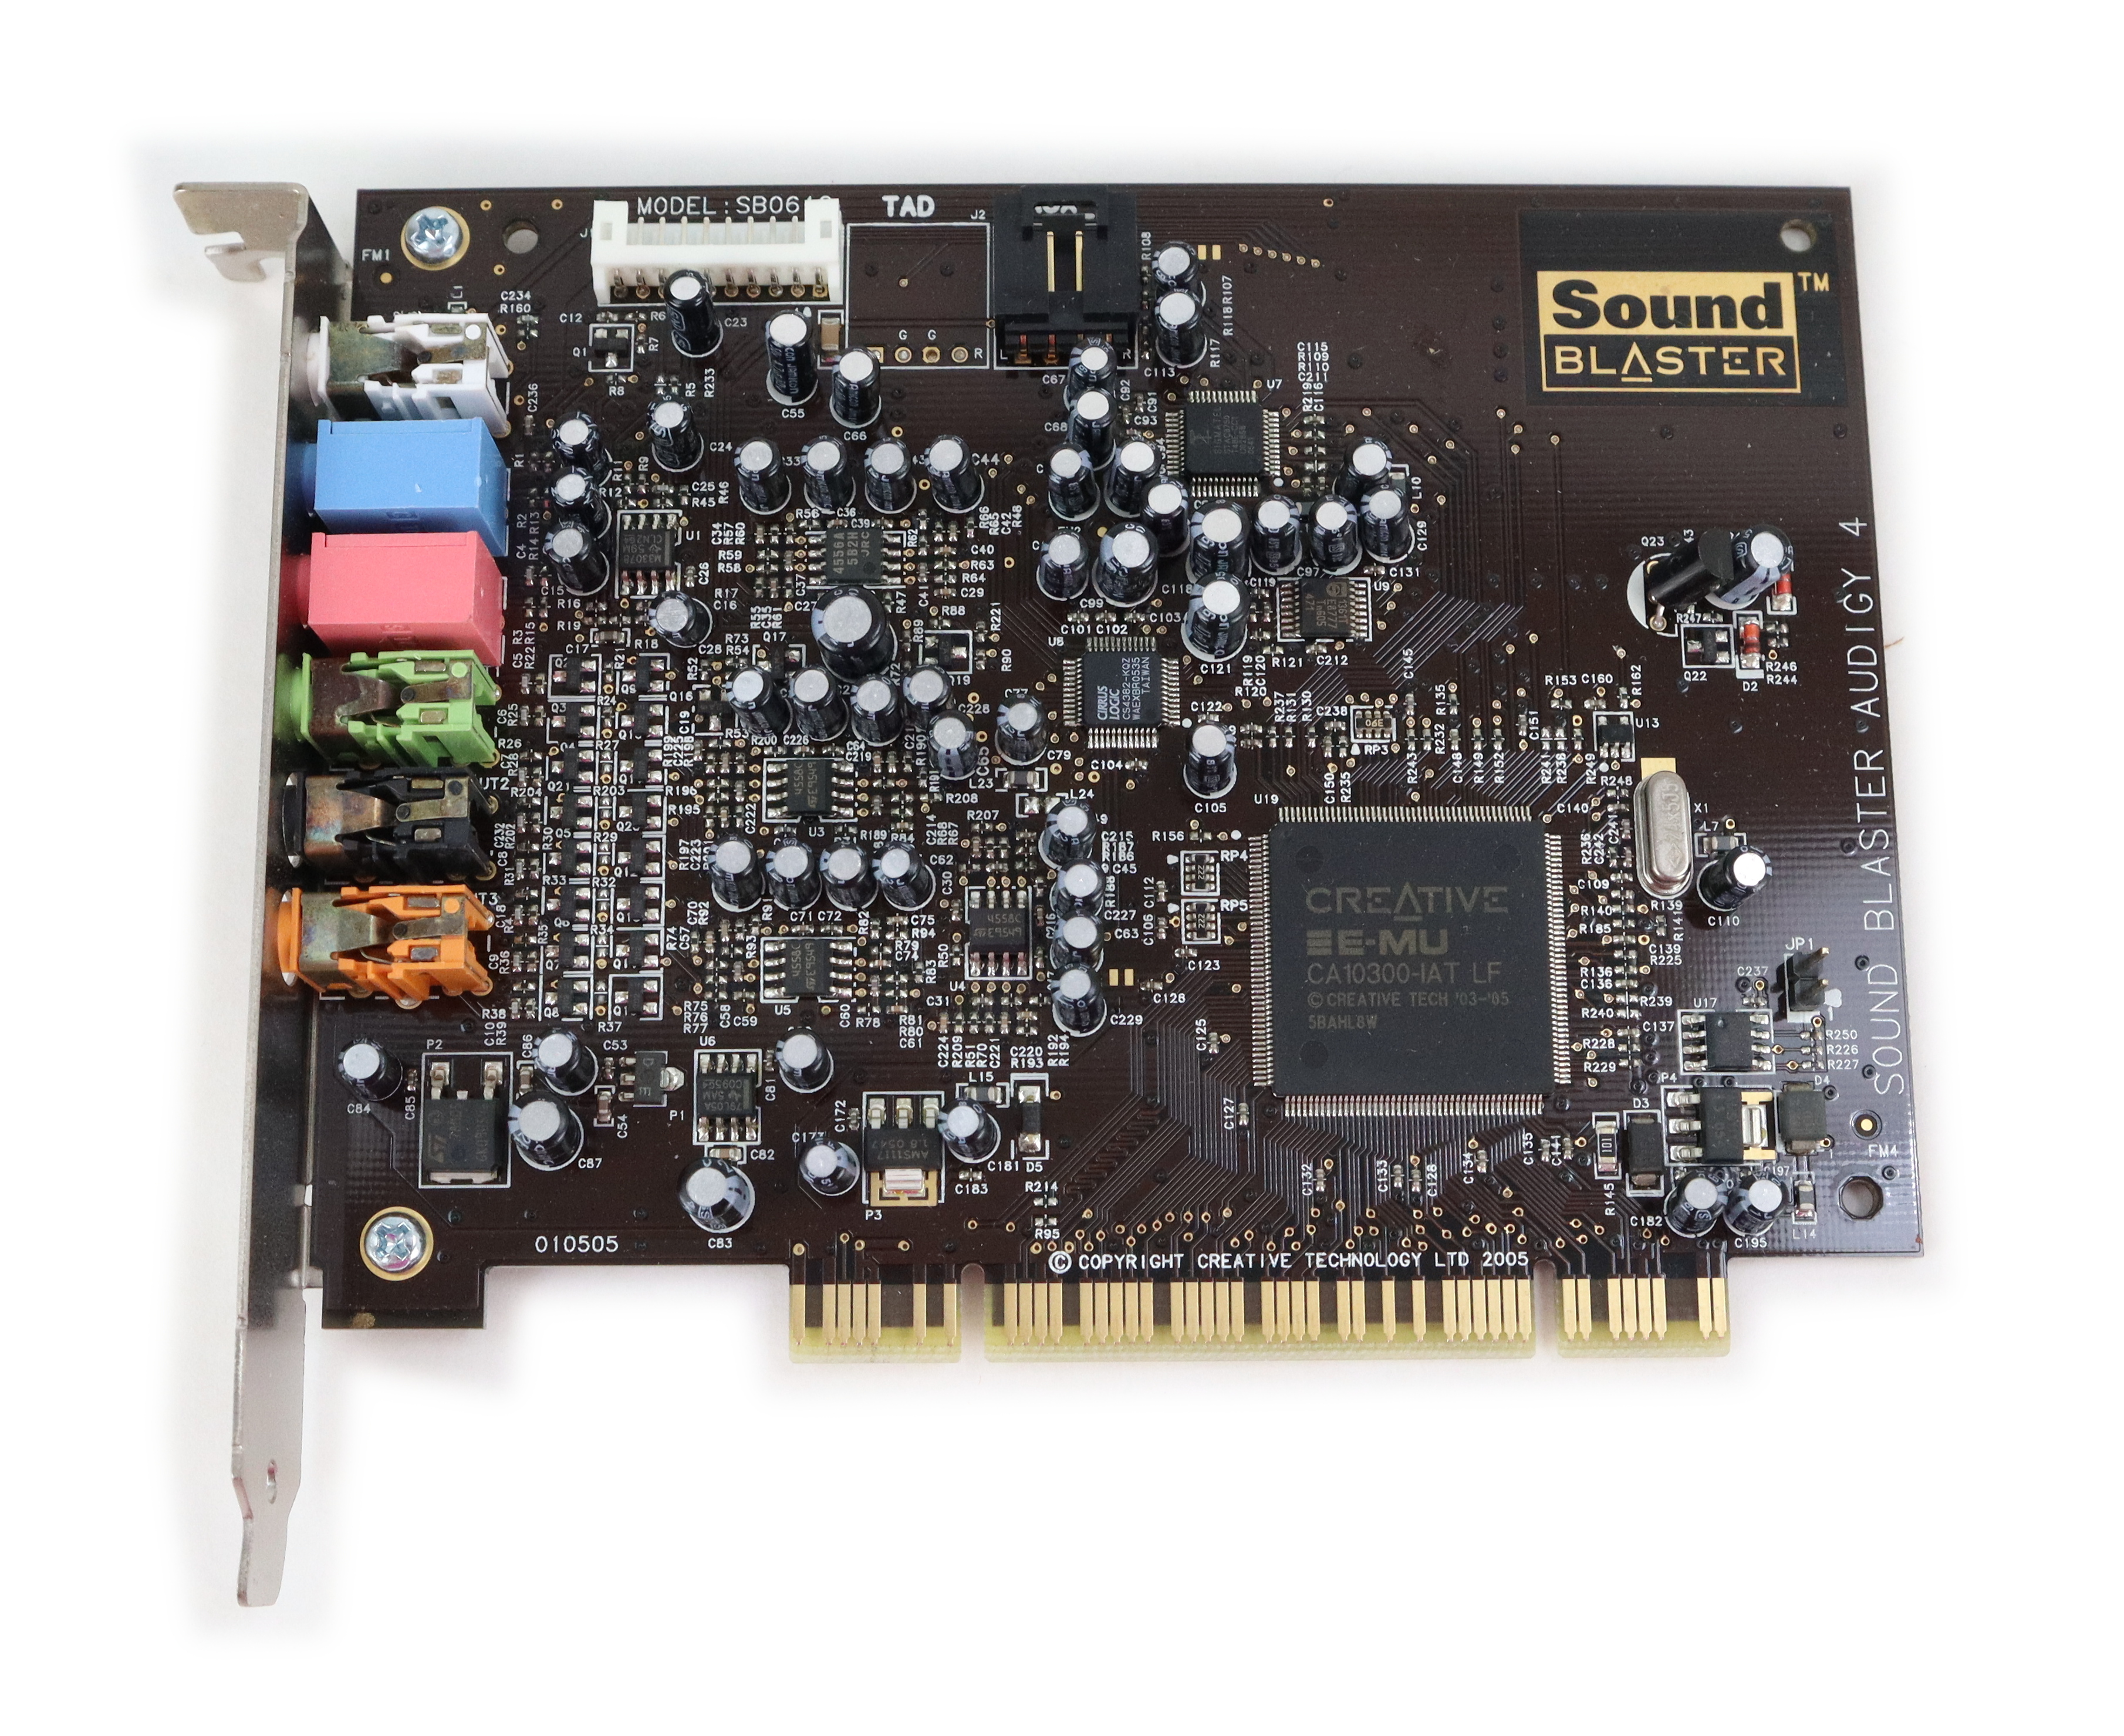 Creative Labs Sound Blaster Audigy 4 Channels 7.1 PCI Sound Card SB0610